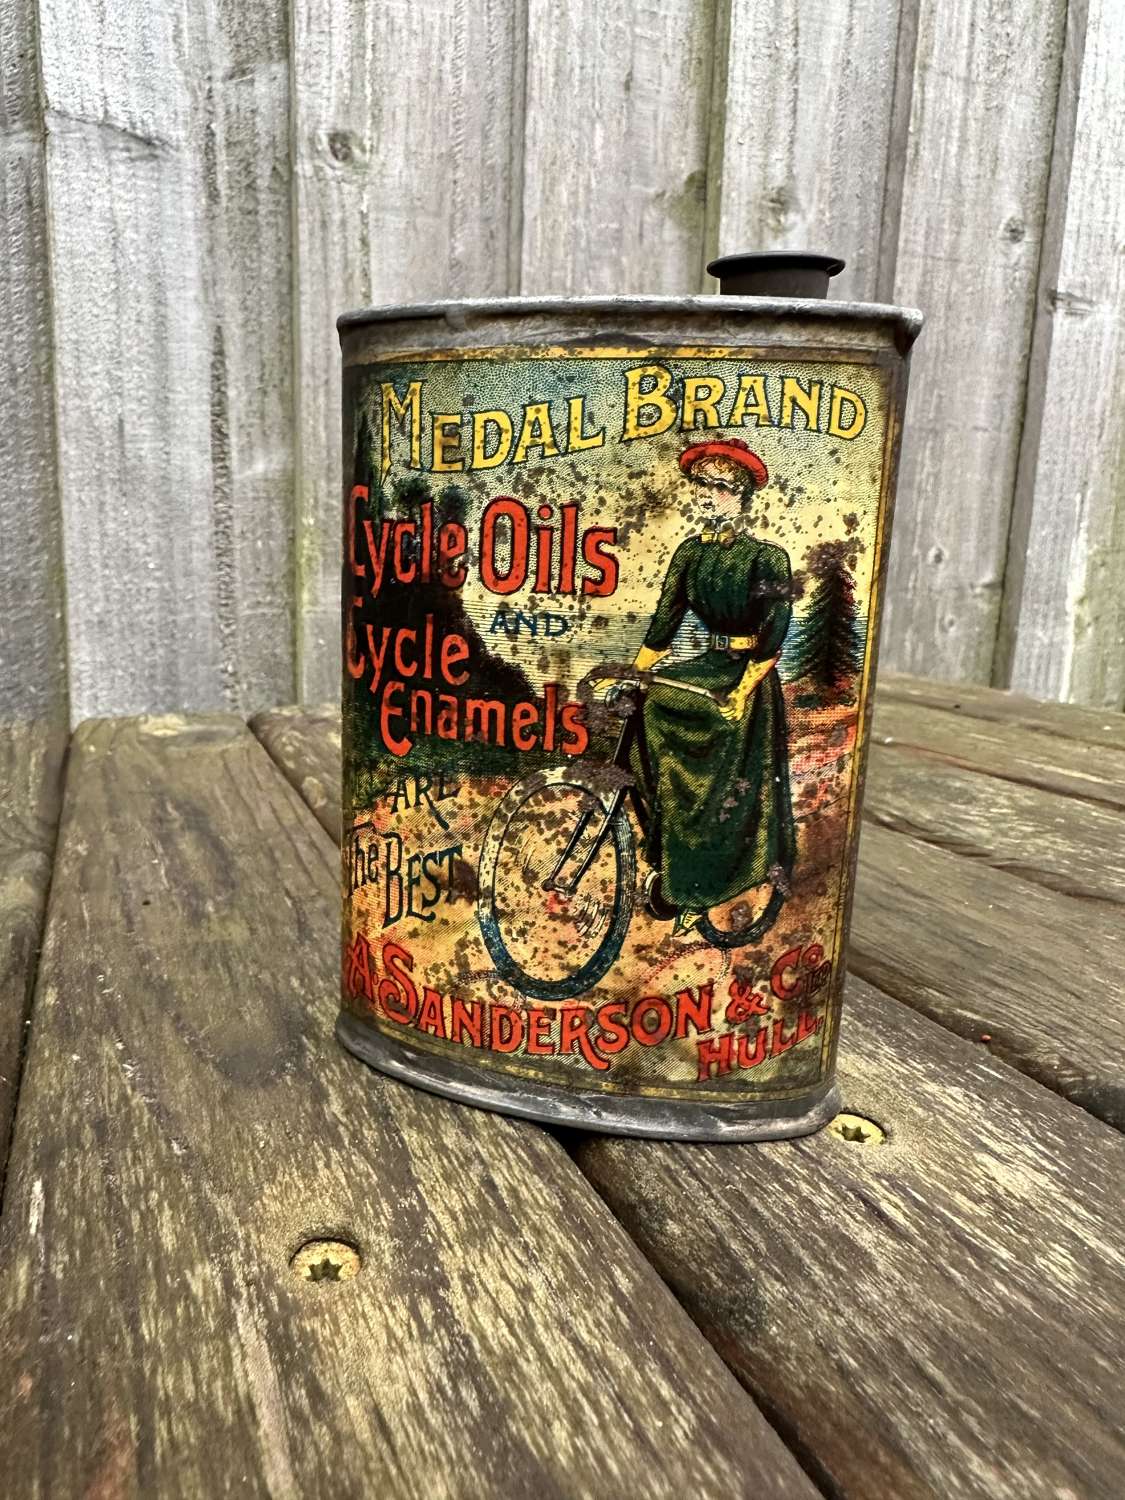 Stunning sandersons cycle oil tin